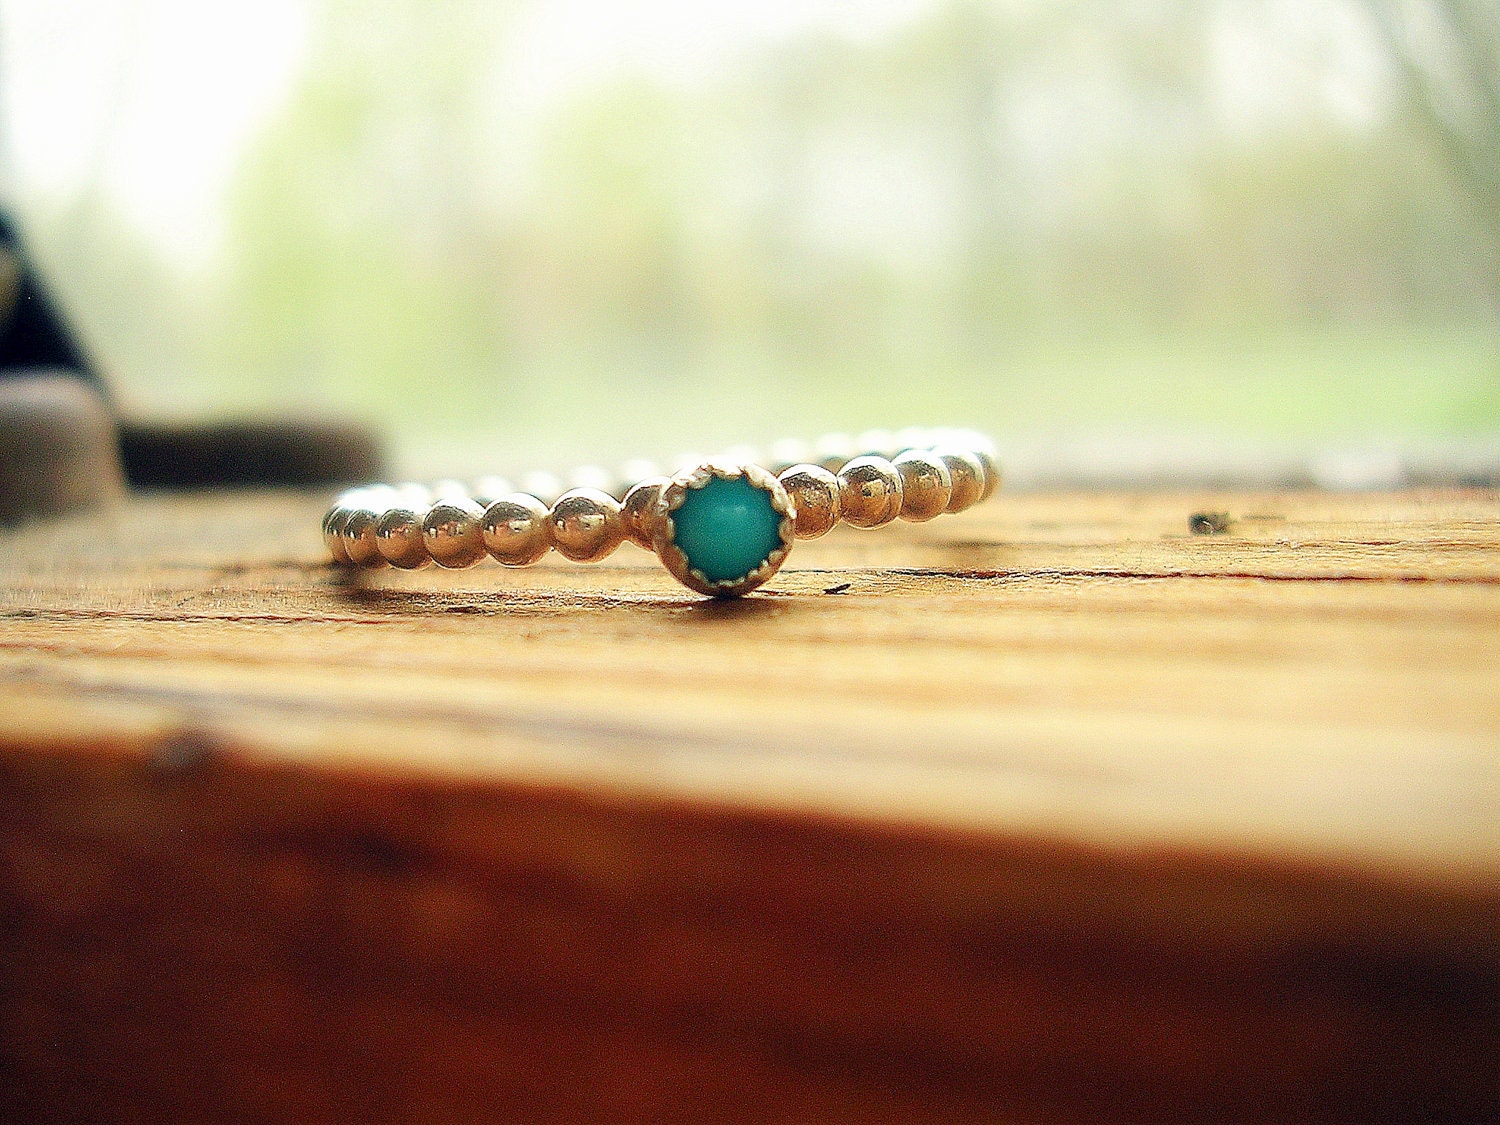 Dainty Turquoise Stacking Ring Turquoise Solitaire Ring Shiny or Oxidized - made to order in your finger size